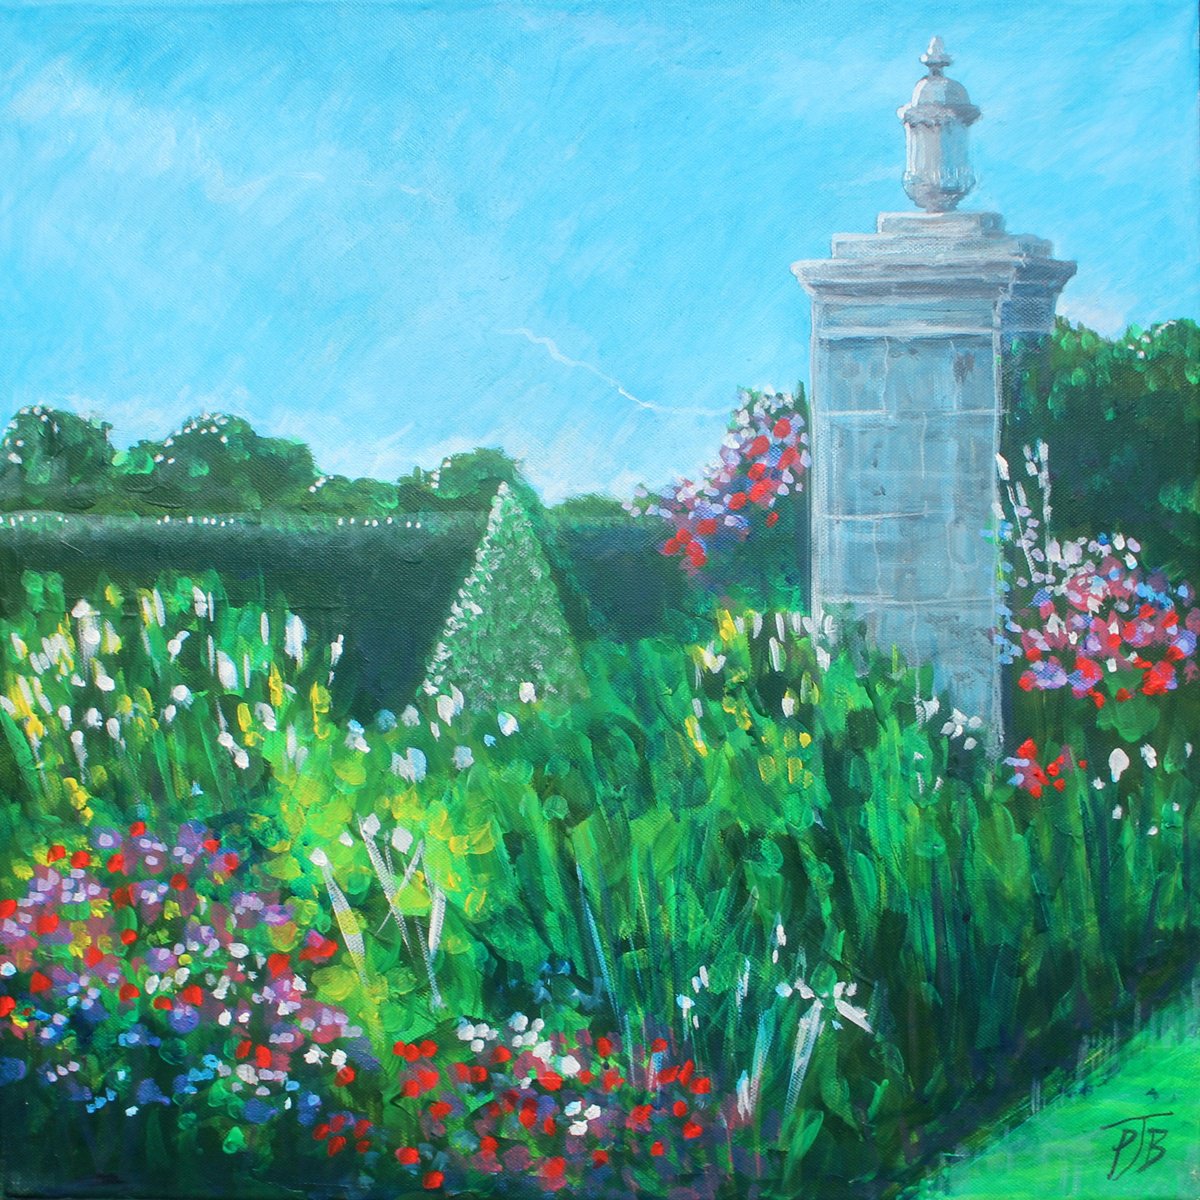 Lytes Cary Manor Gardens I by Paul J Best